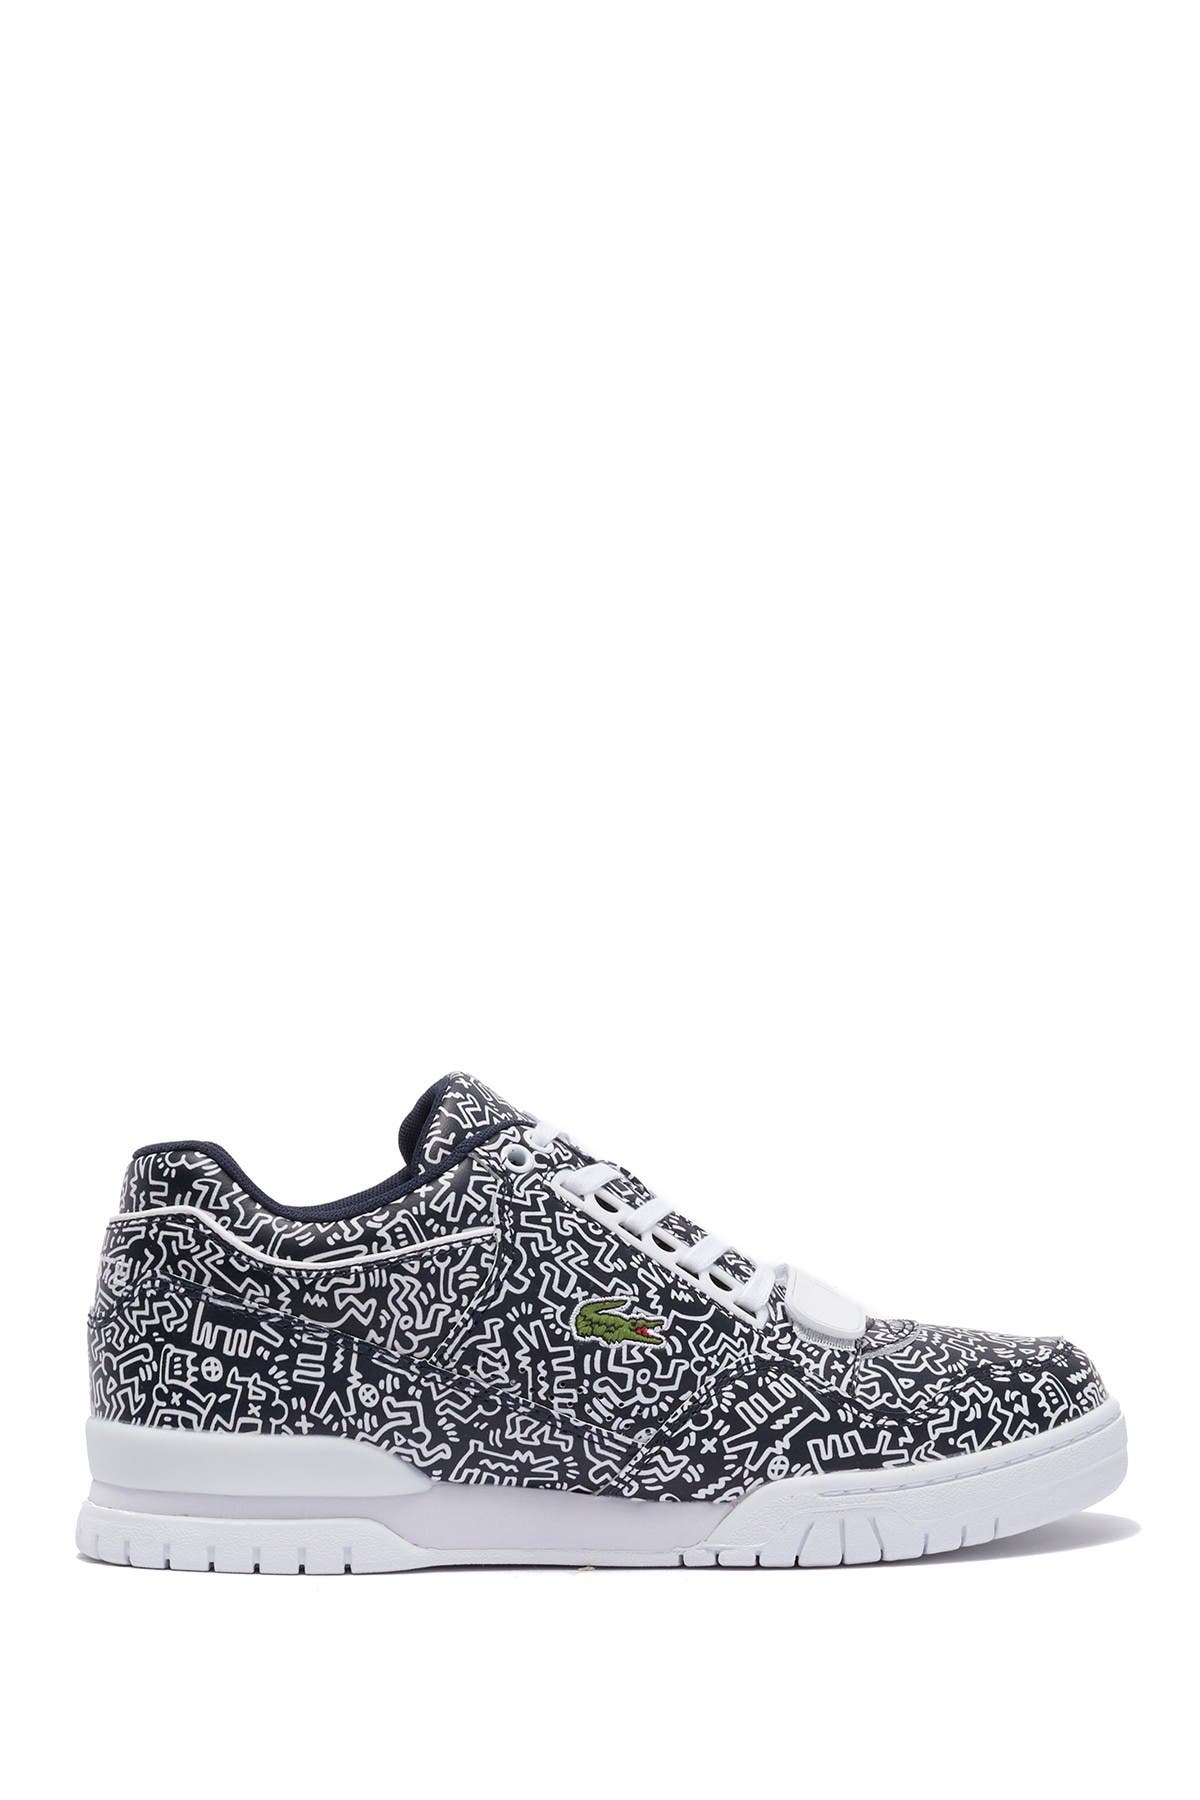 lacoste keith haring shoes